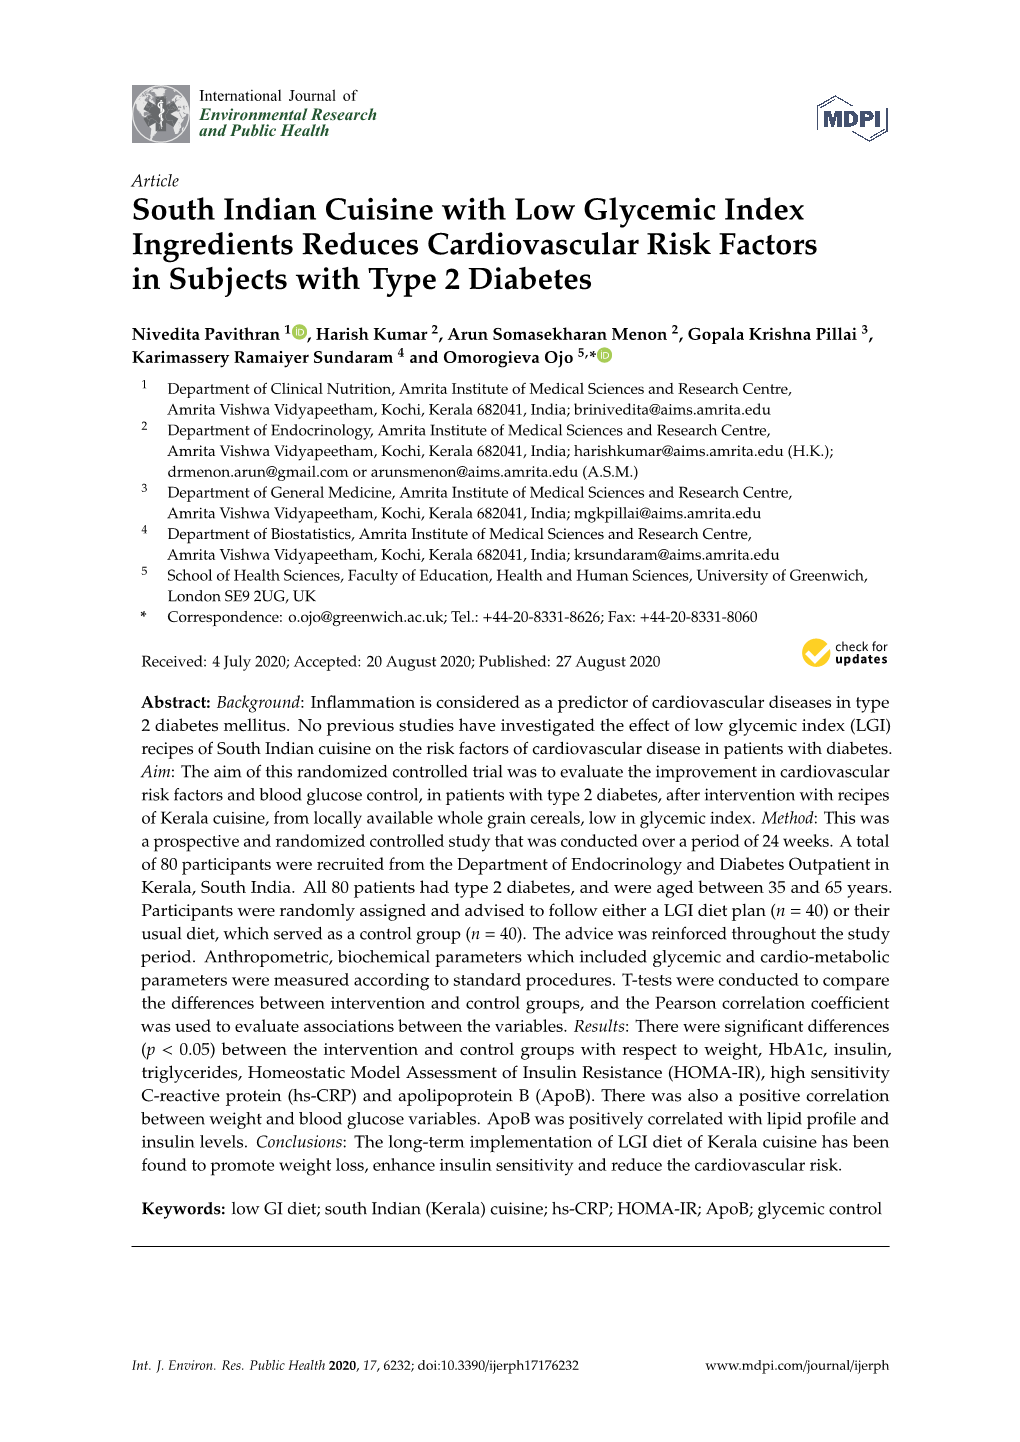 South Indian Cuisine with Low Glycemic Index Ingredients Reduces Cardiovascular Risk Factors in Subjects with Type 2 Diabetes